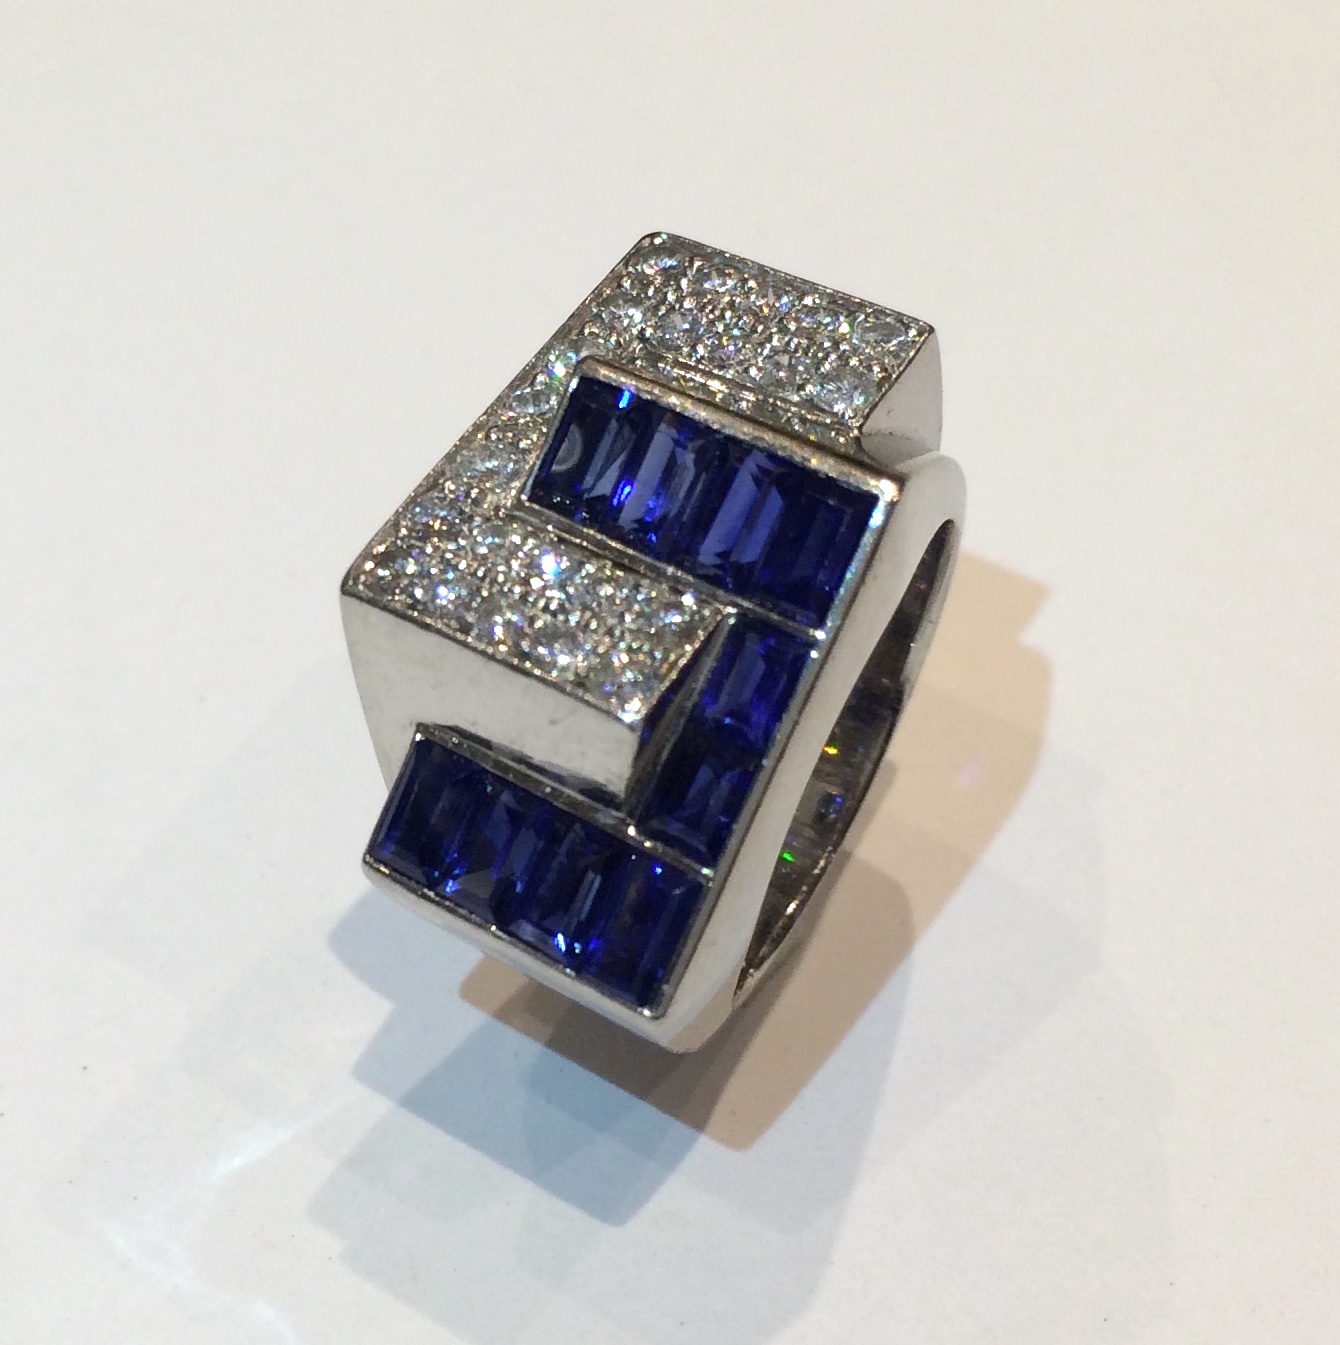 French Art Deco Interlocking ring, Invisibly set rectangular sapphires (10 count, approx. 2.50 carats TW), pave diamonds (approx. 2.50 carats TW) all set in a platinum mount, c. 1935